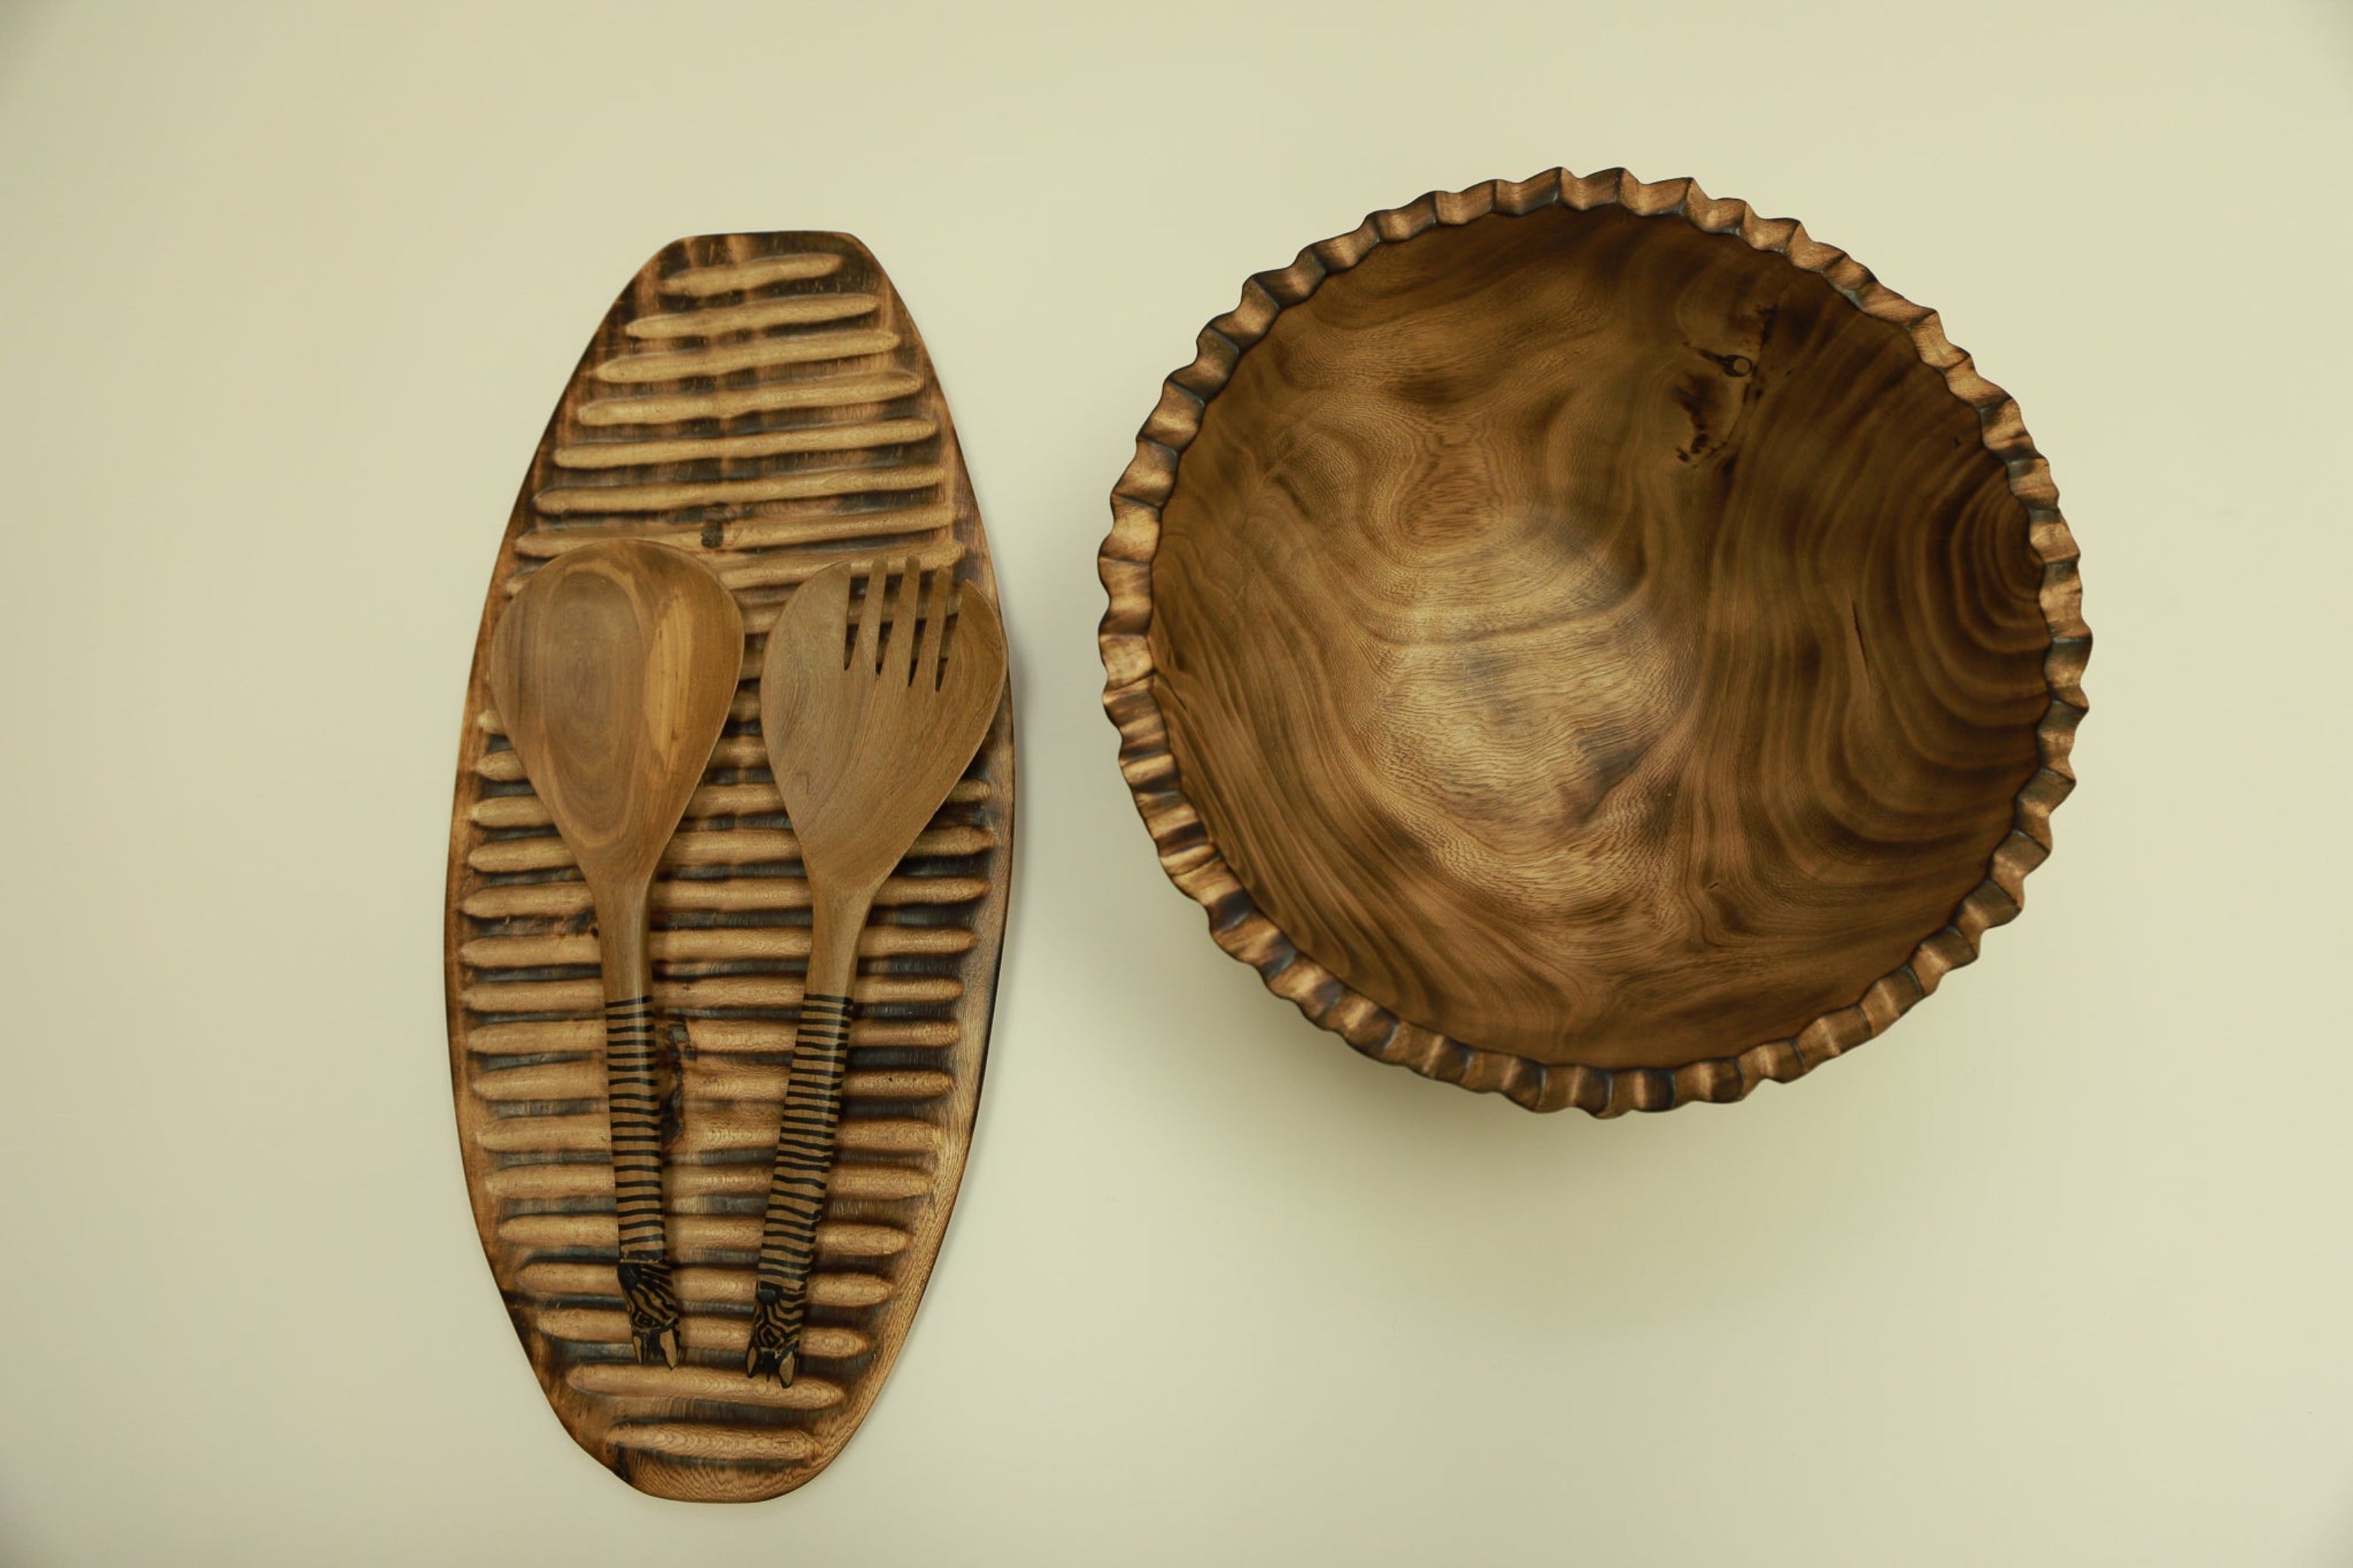 Handcrafted Bread Serving woodenTray Set of 3,